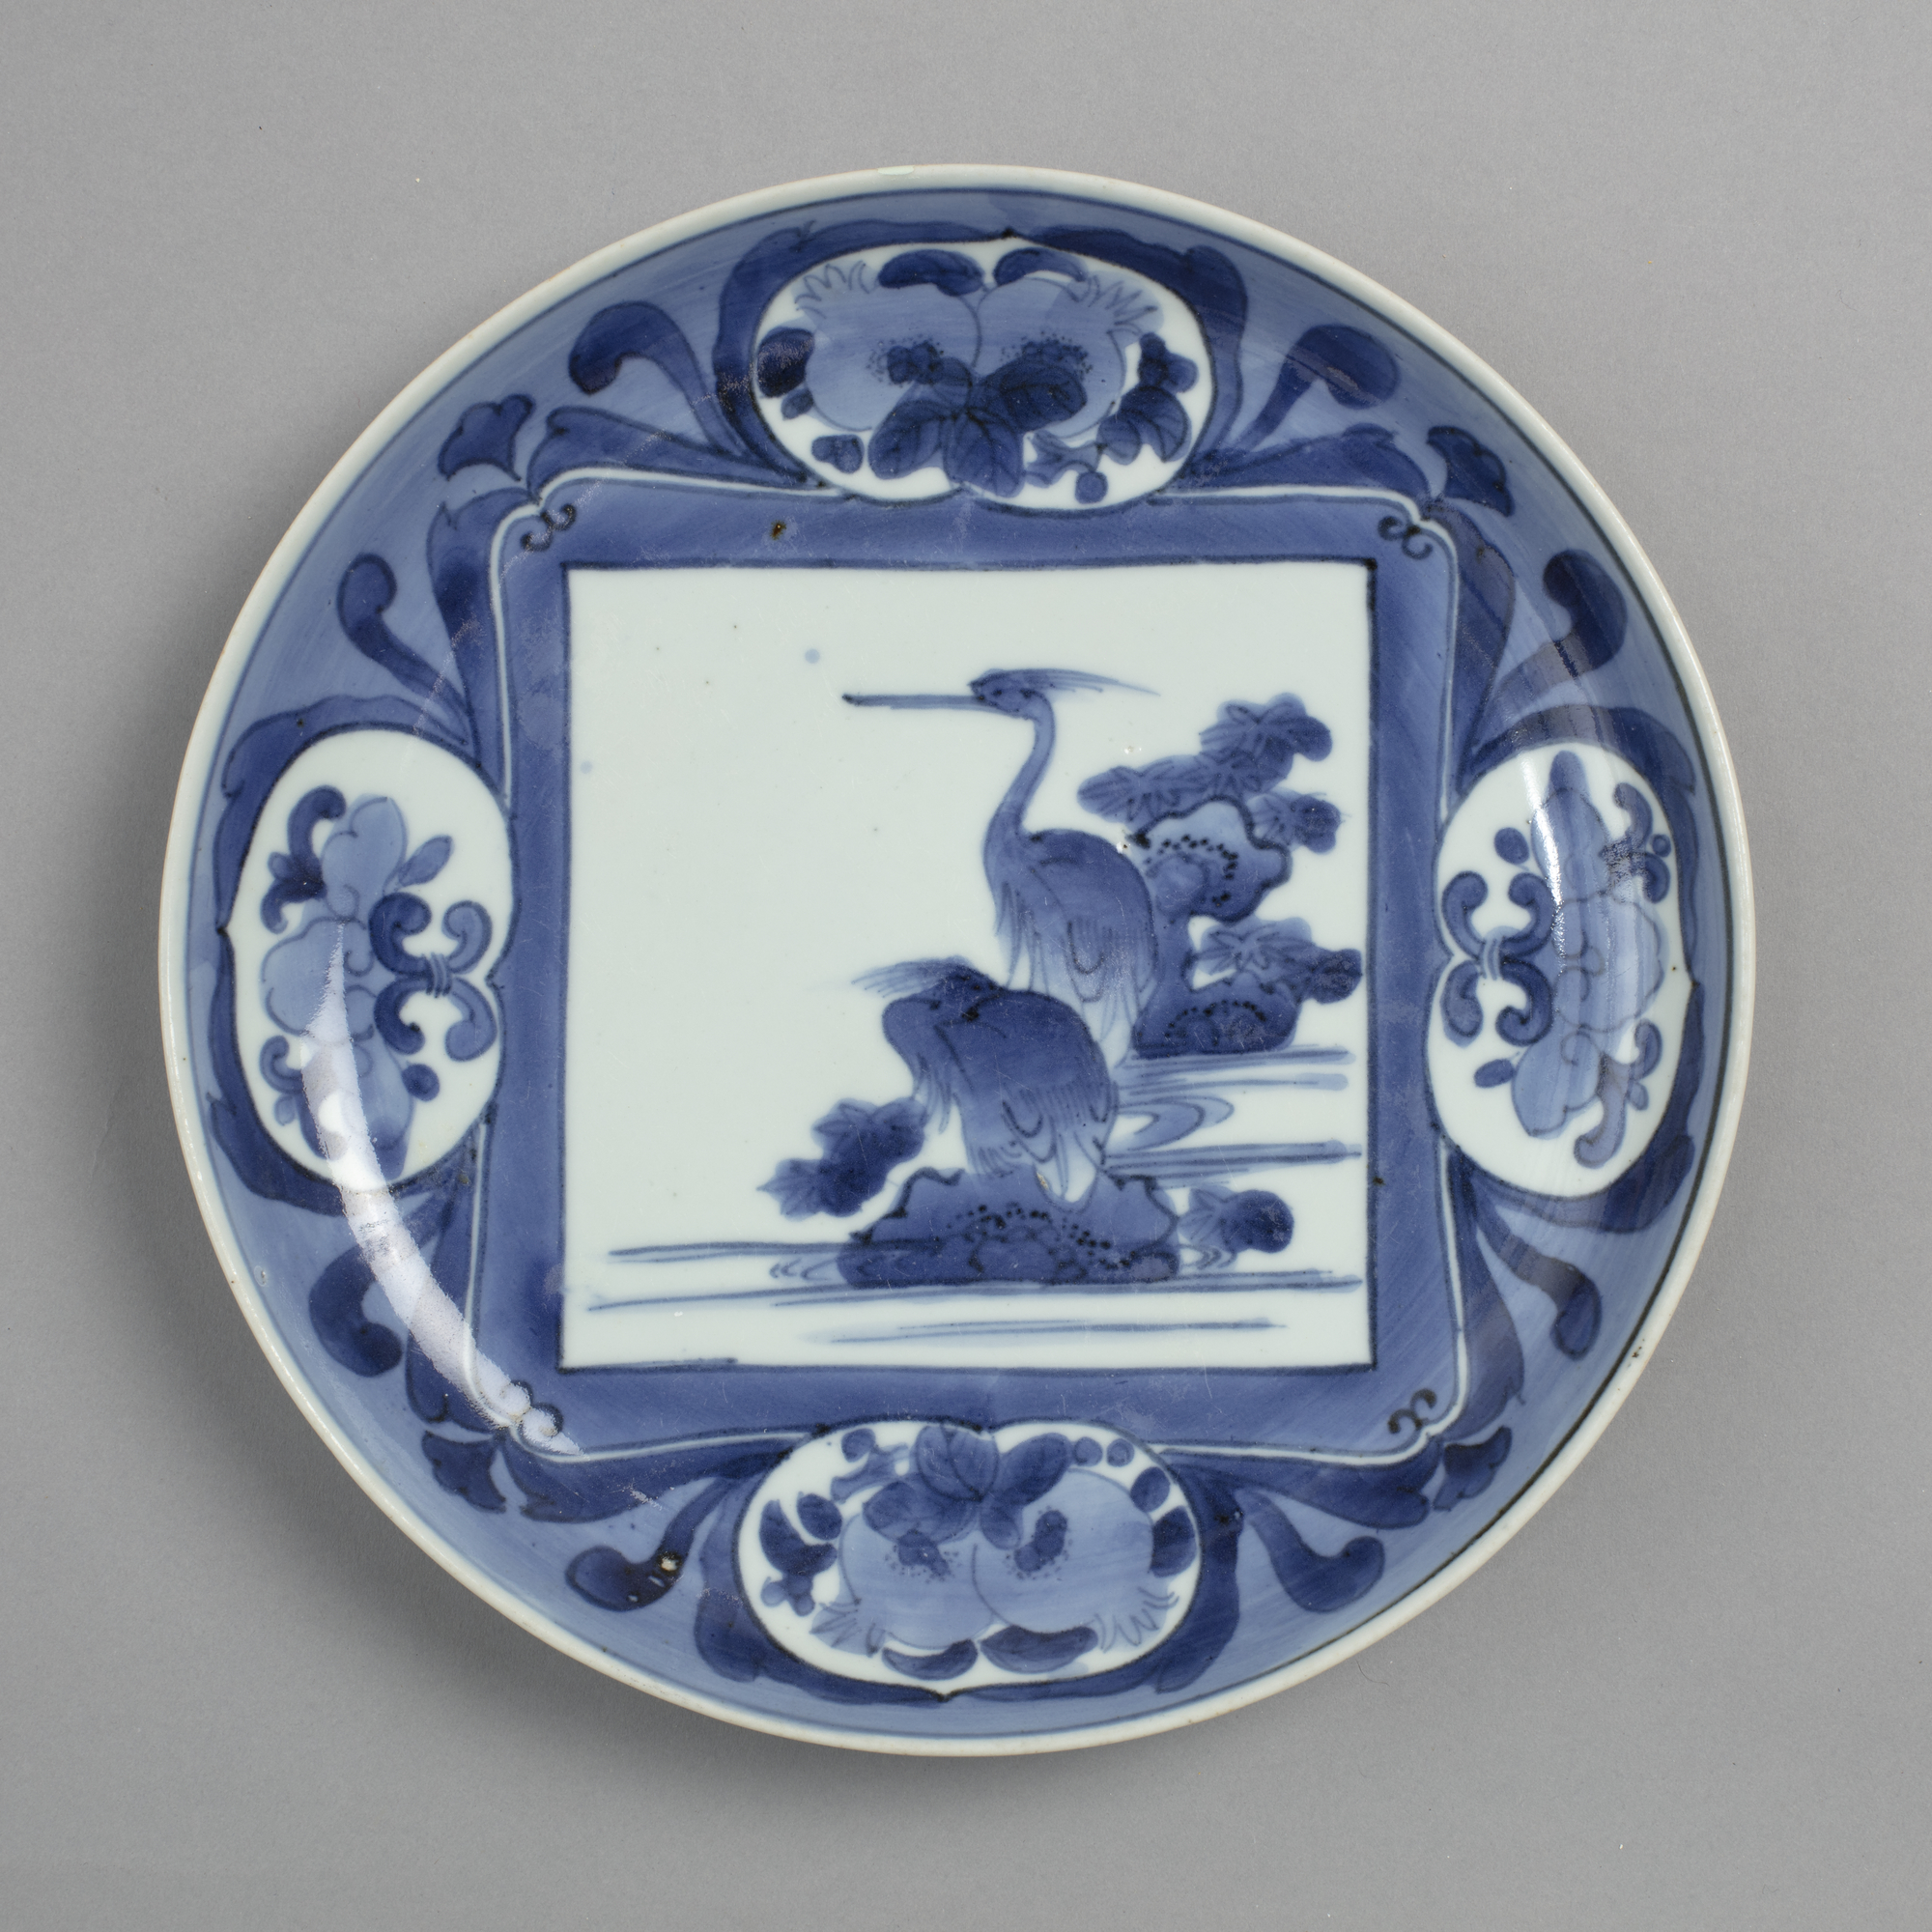 Dish with blue on white design of herons and pomegranates